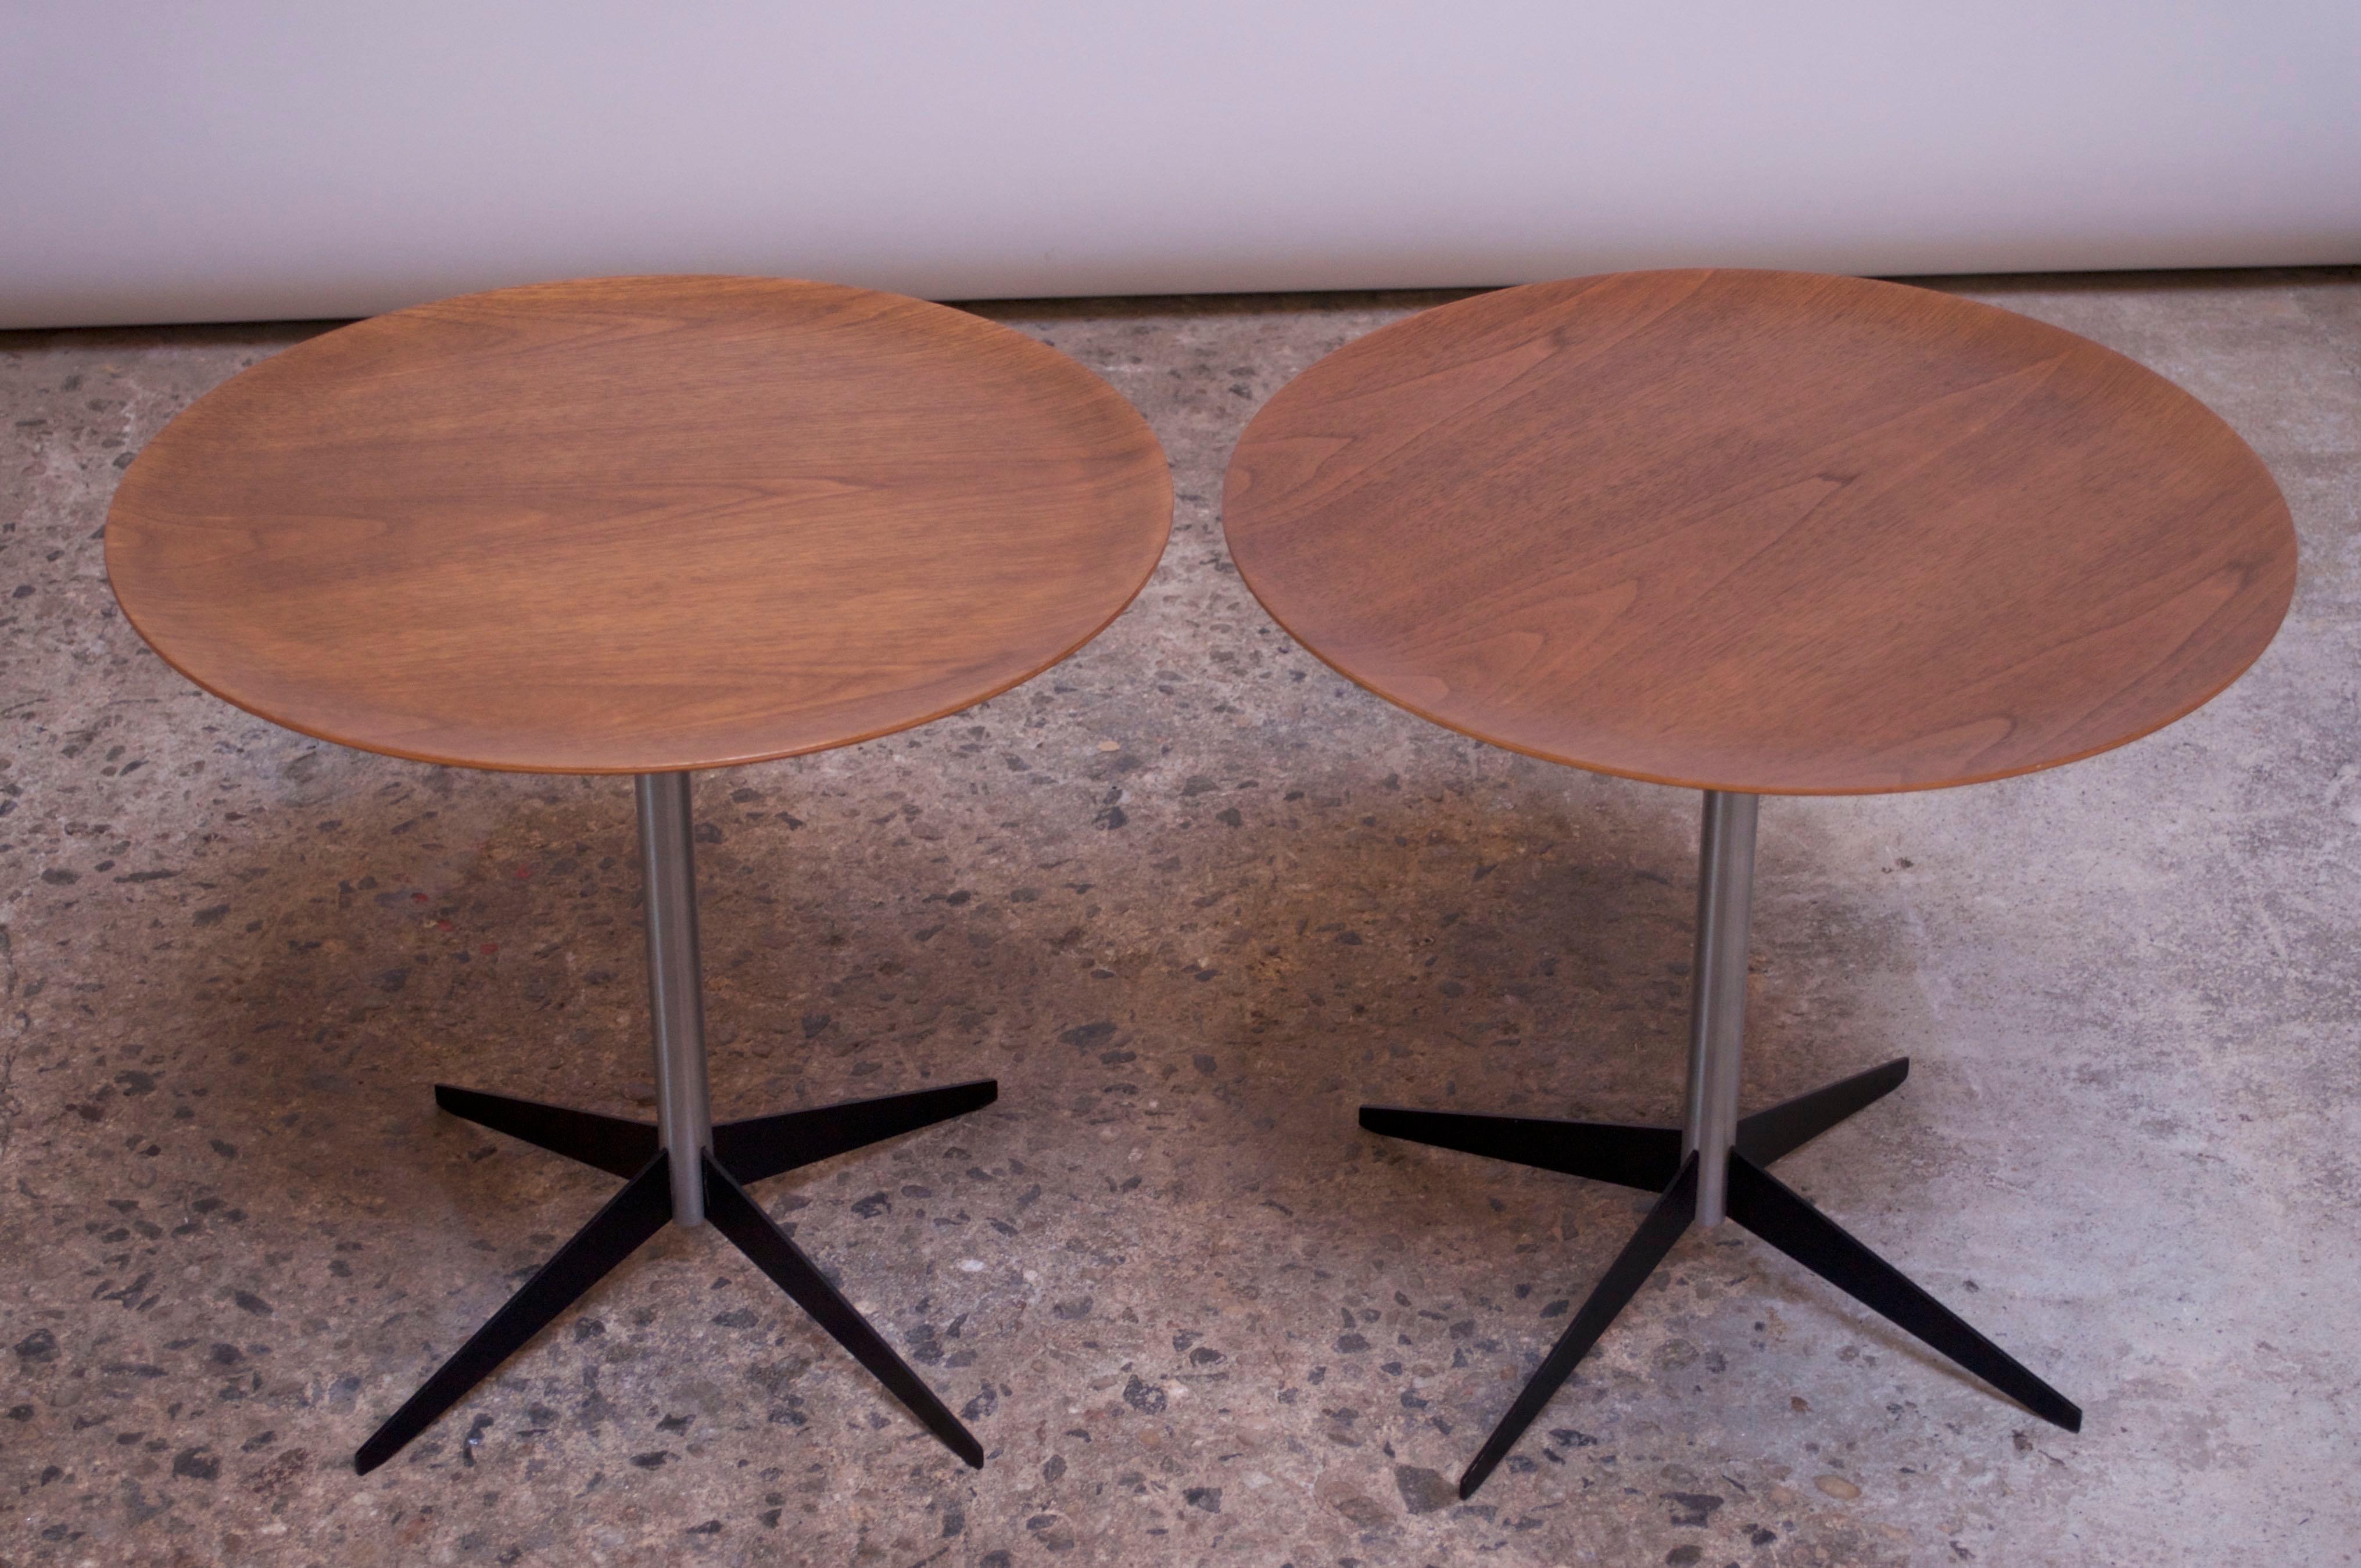 Mid-Century Modern Pair of Vintage Walnut and Steel Tray Tables By George Nelson for Herman Miller